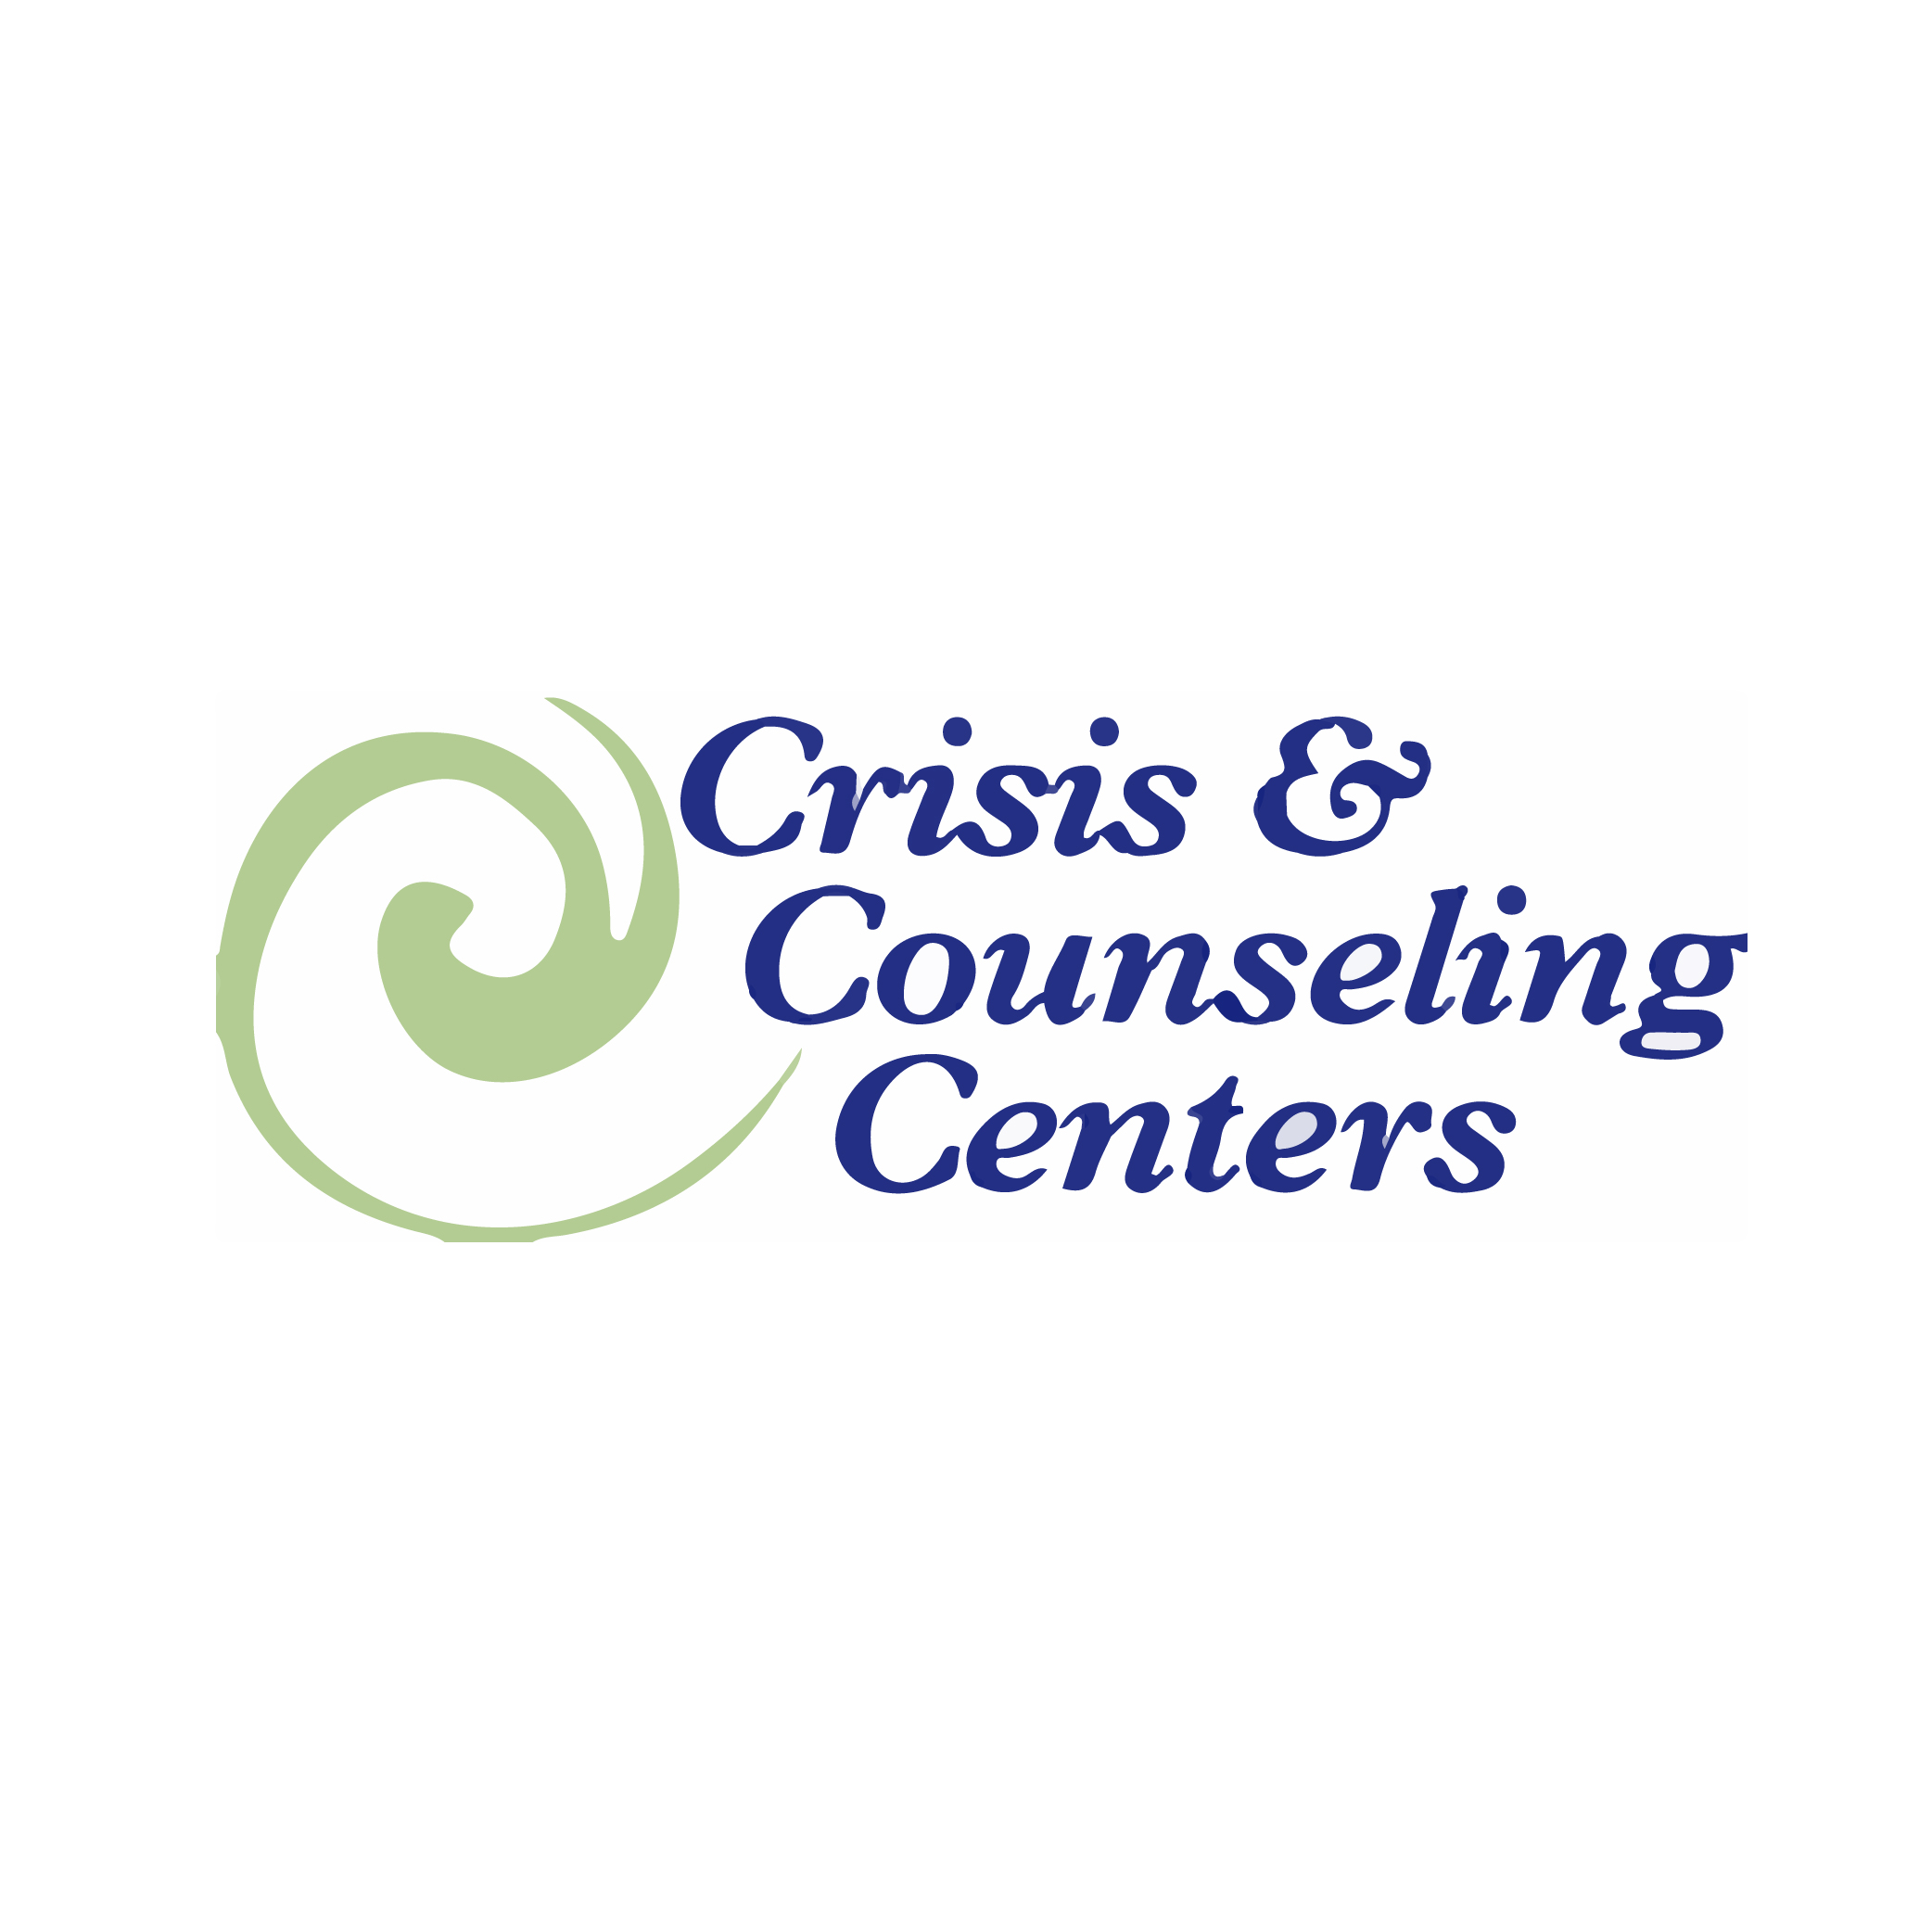 Crisis & Counseling Centers logo